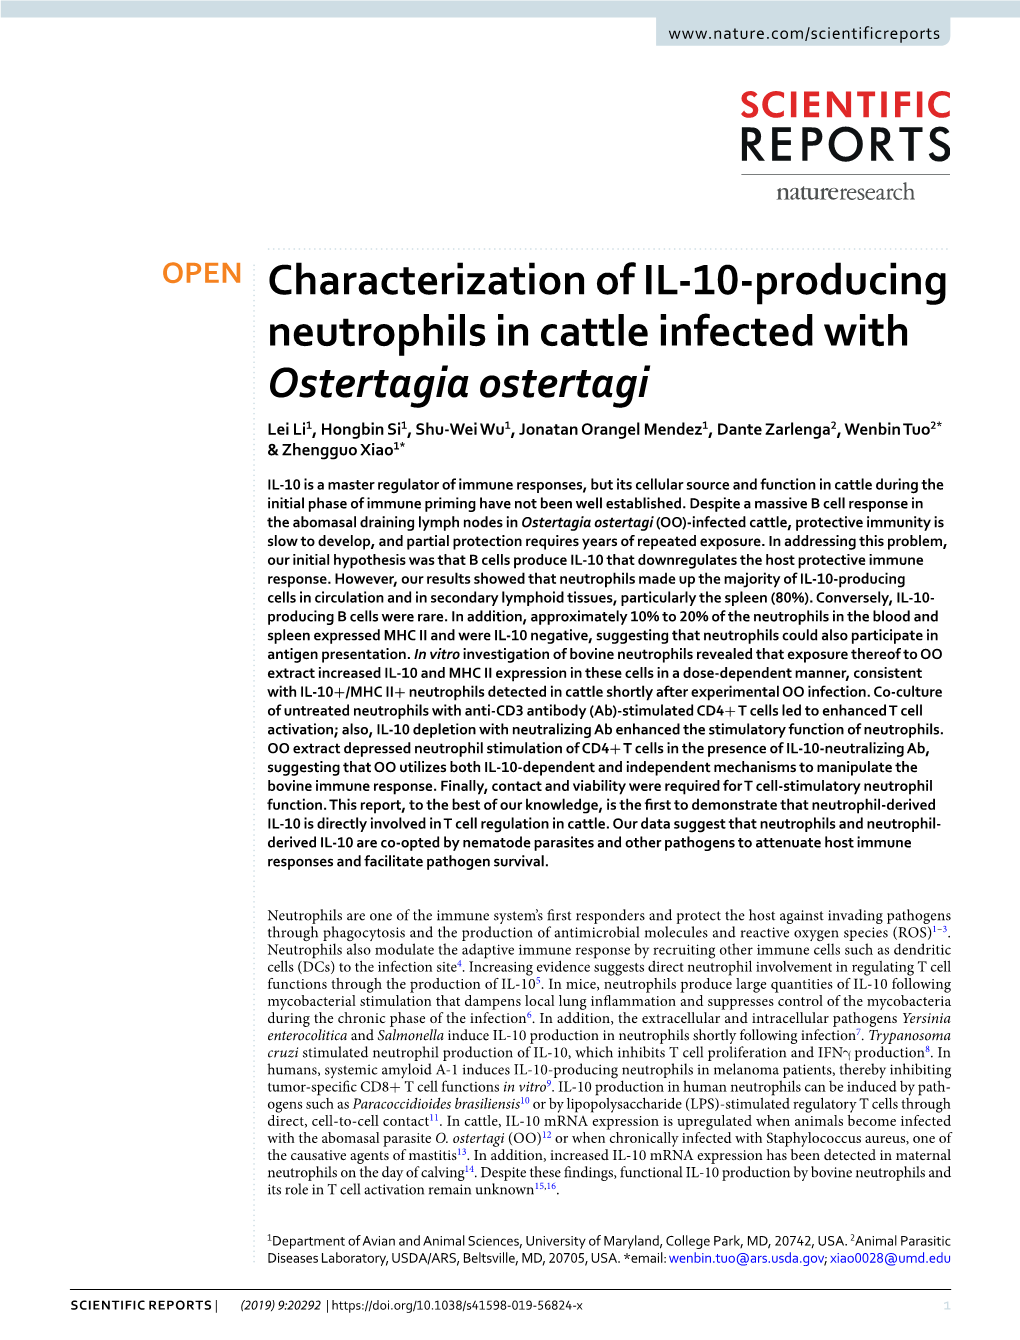 Characterization of IL-10-Producing Neutrophils in Cattle Infected With